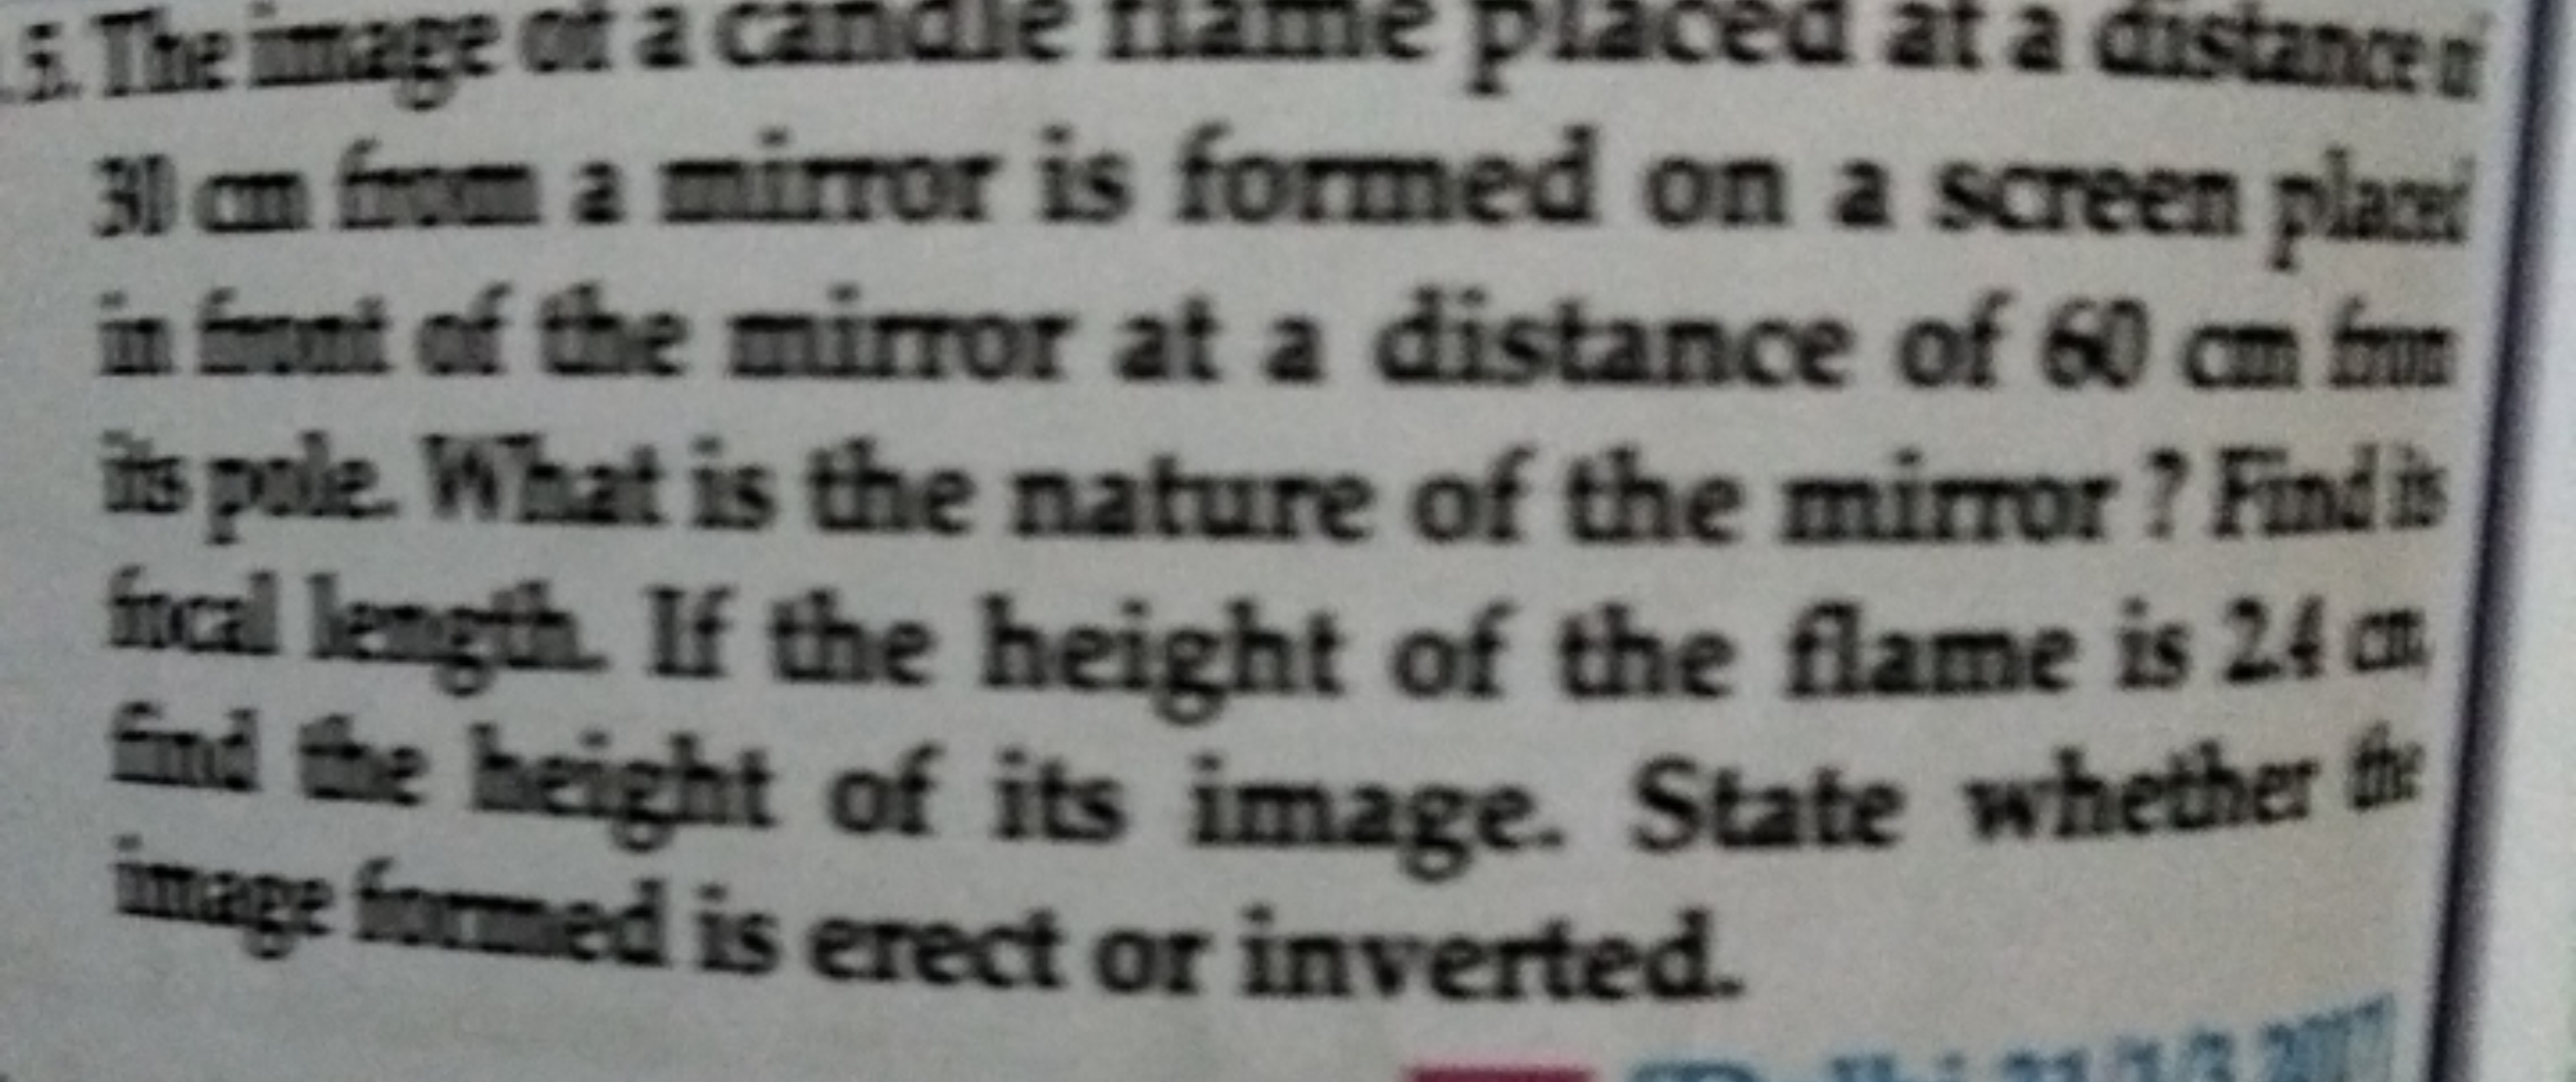 in fout of the mirror at a distance of 60 cm its pole. What is the nat